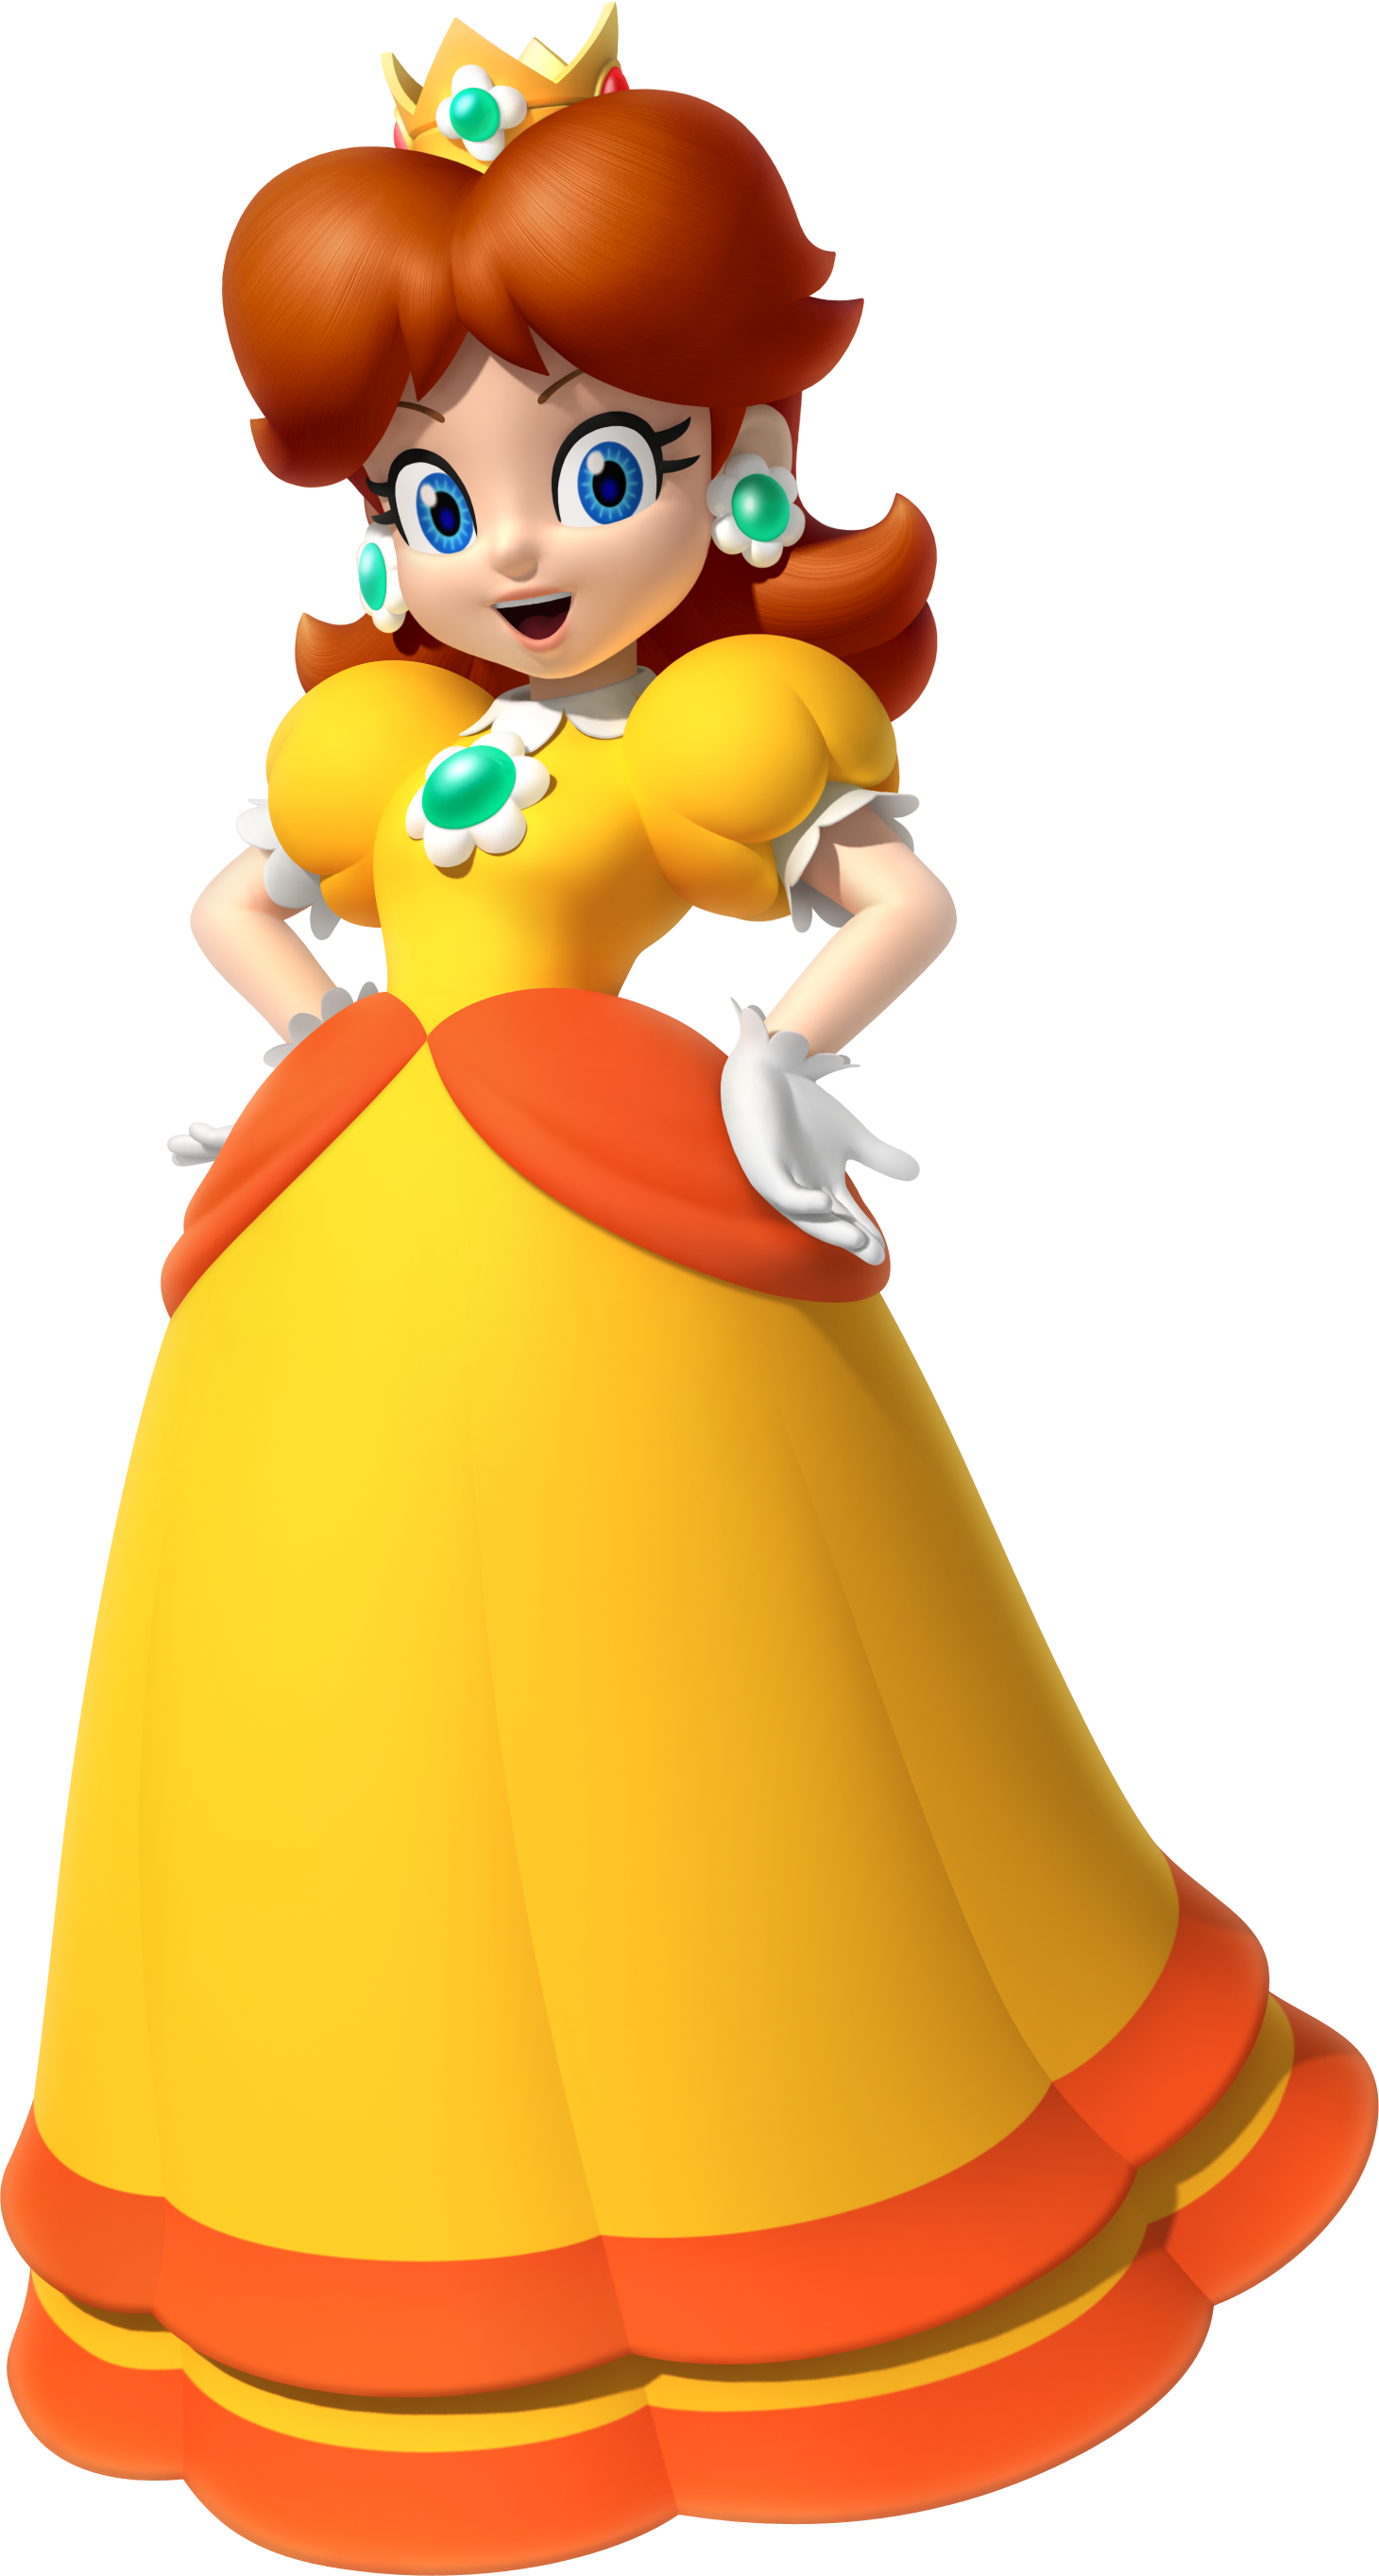 A Cartoon Character Of A Woman In A Yellow Dress